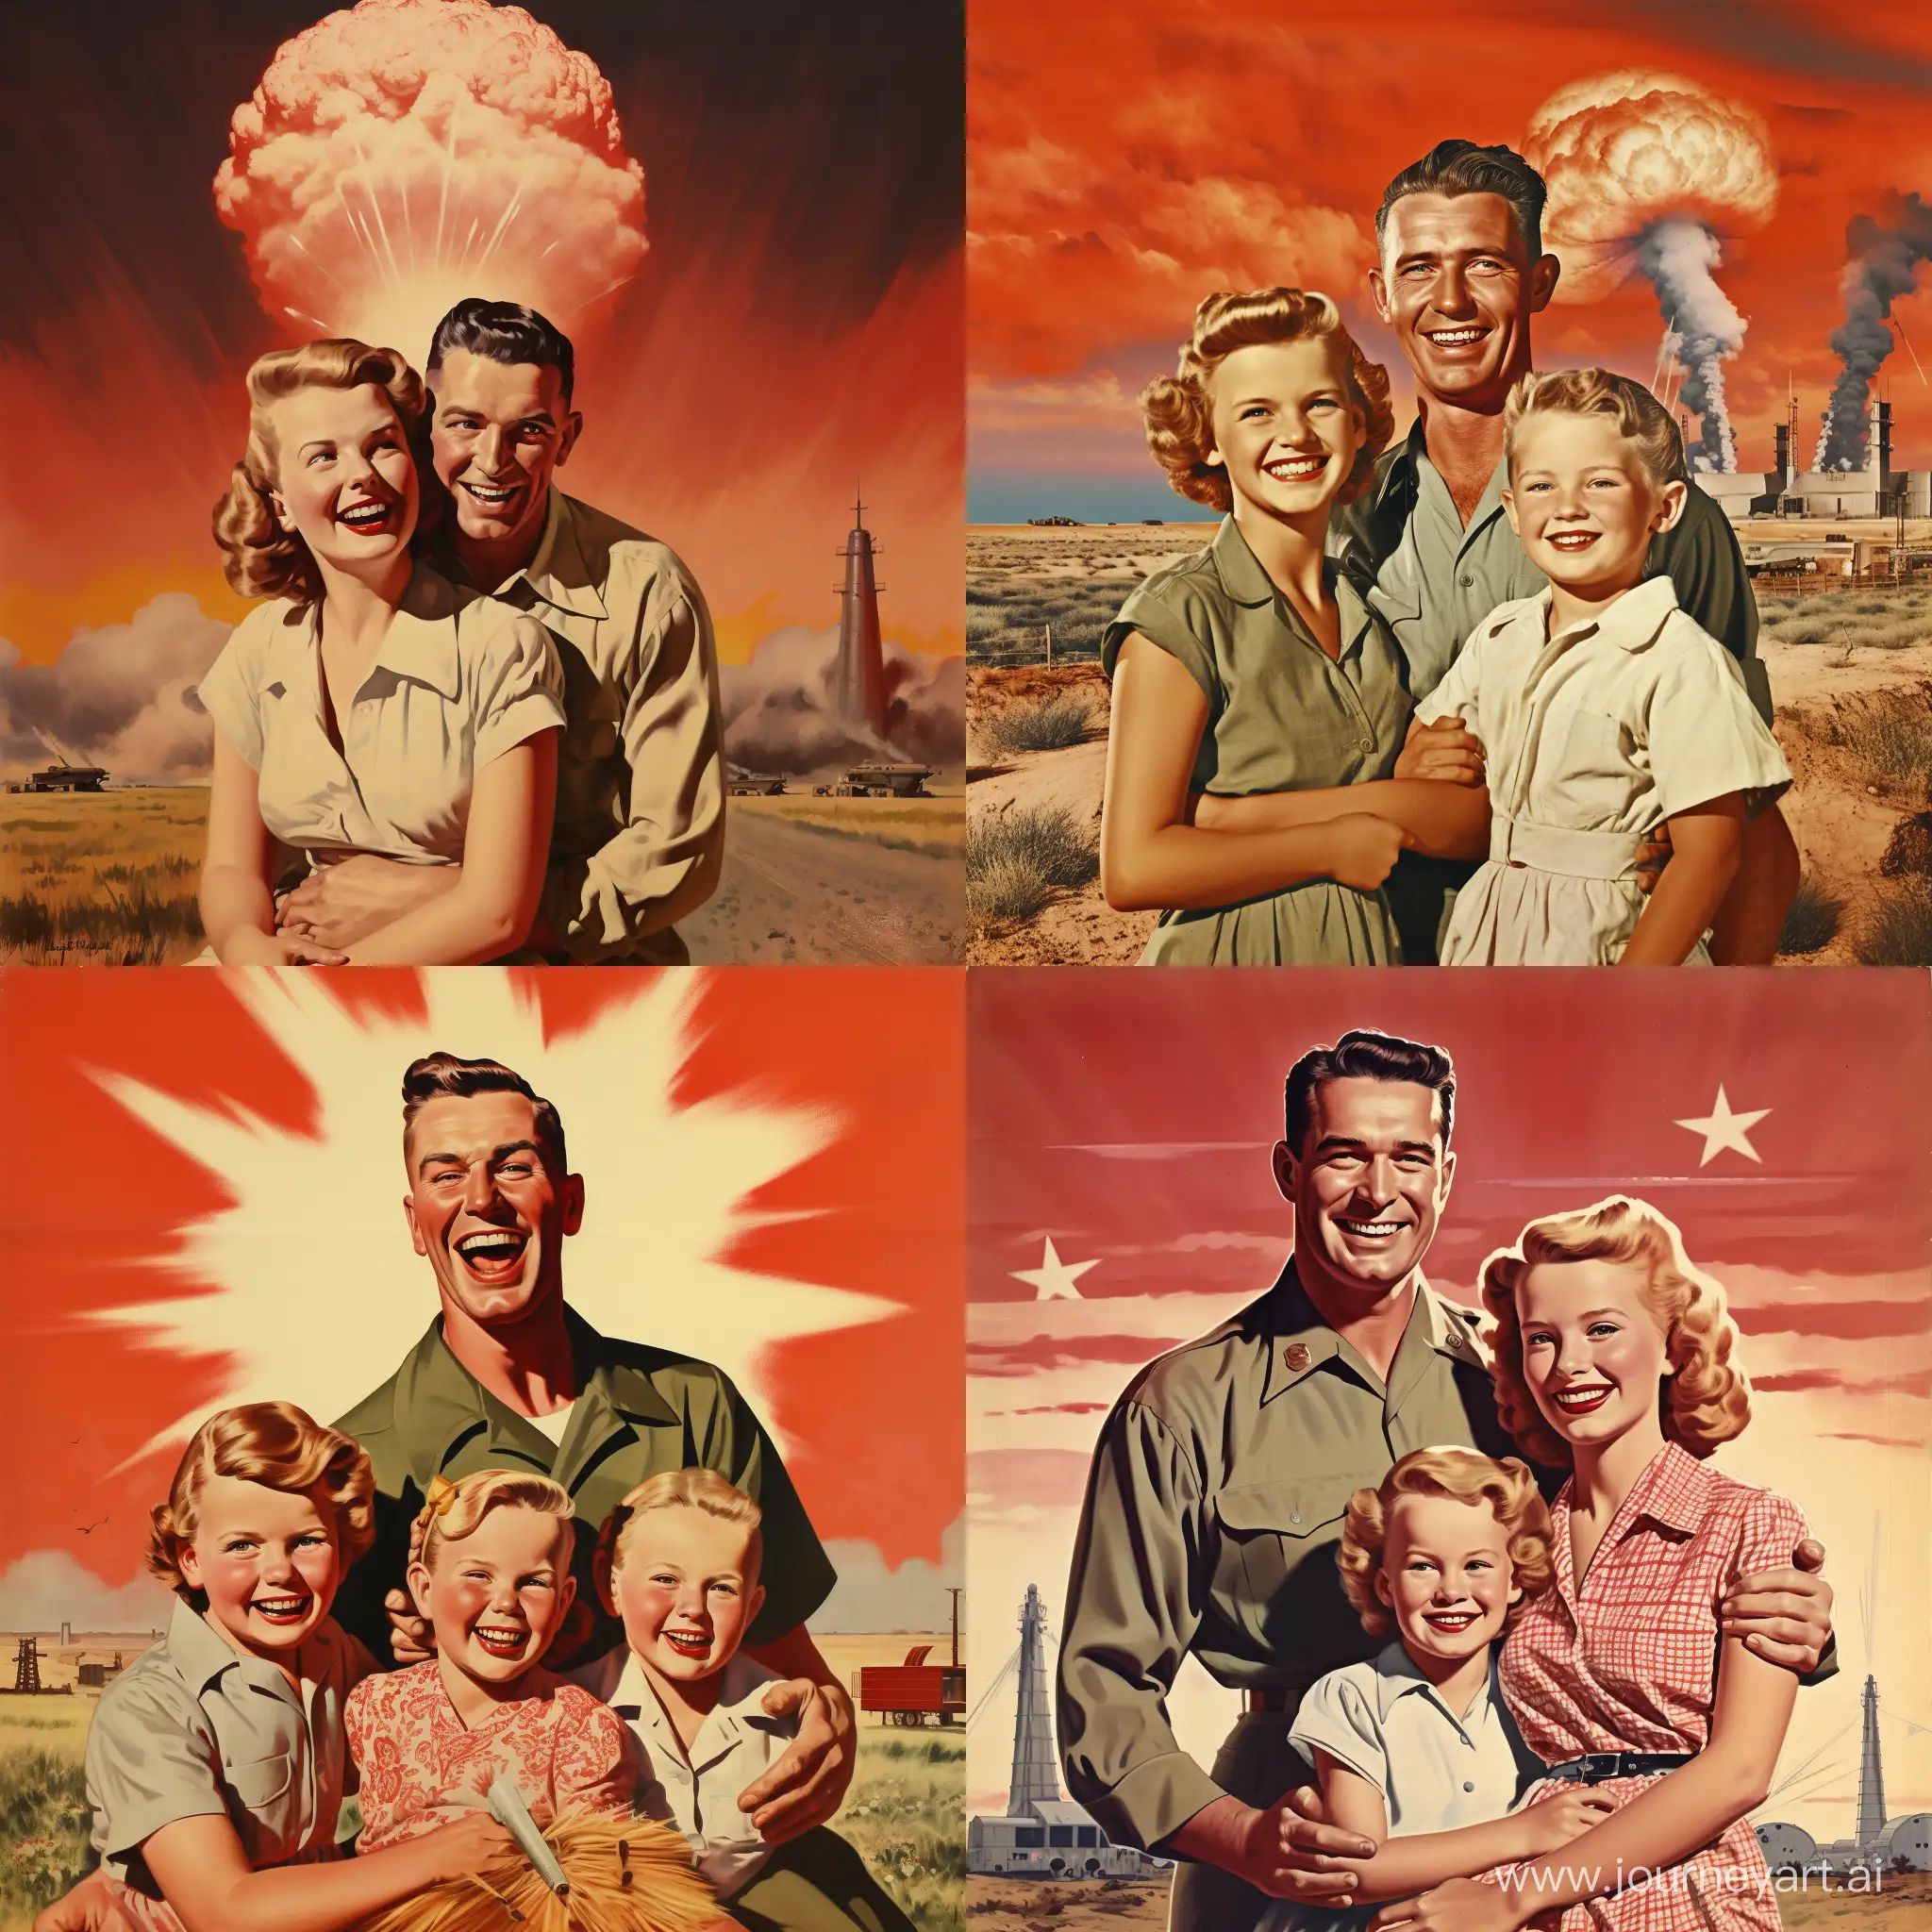 Smiling-1940s-Nuclear-Family-in-WarTime-Propaganda-Style